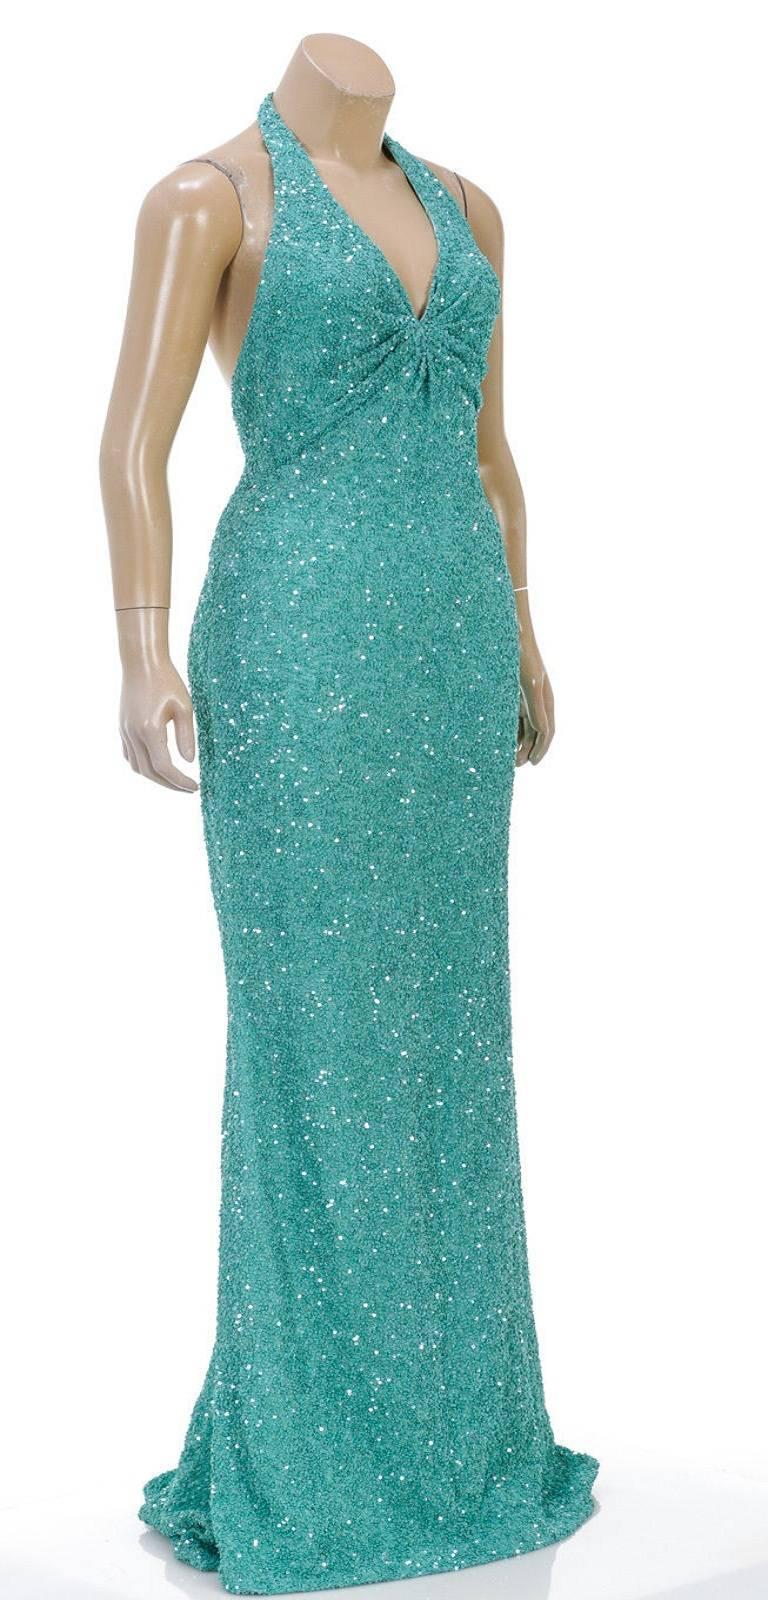 Designer: Other
Type: 
Dress
Condition: 
NEW (Sample)
Color: 
Aqua
Material: 
97% Silk, 3% Spandex
Dimensions: 
Bust: 28